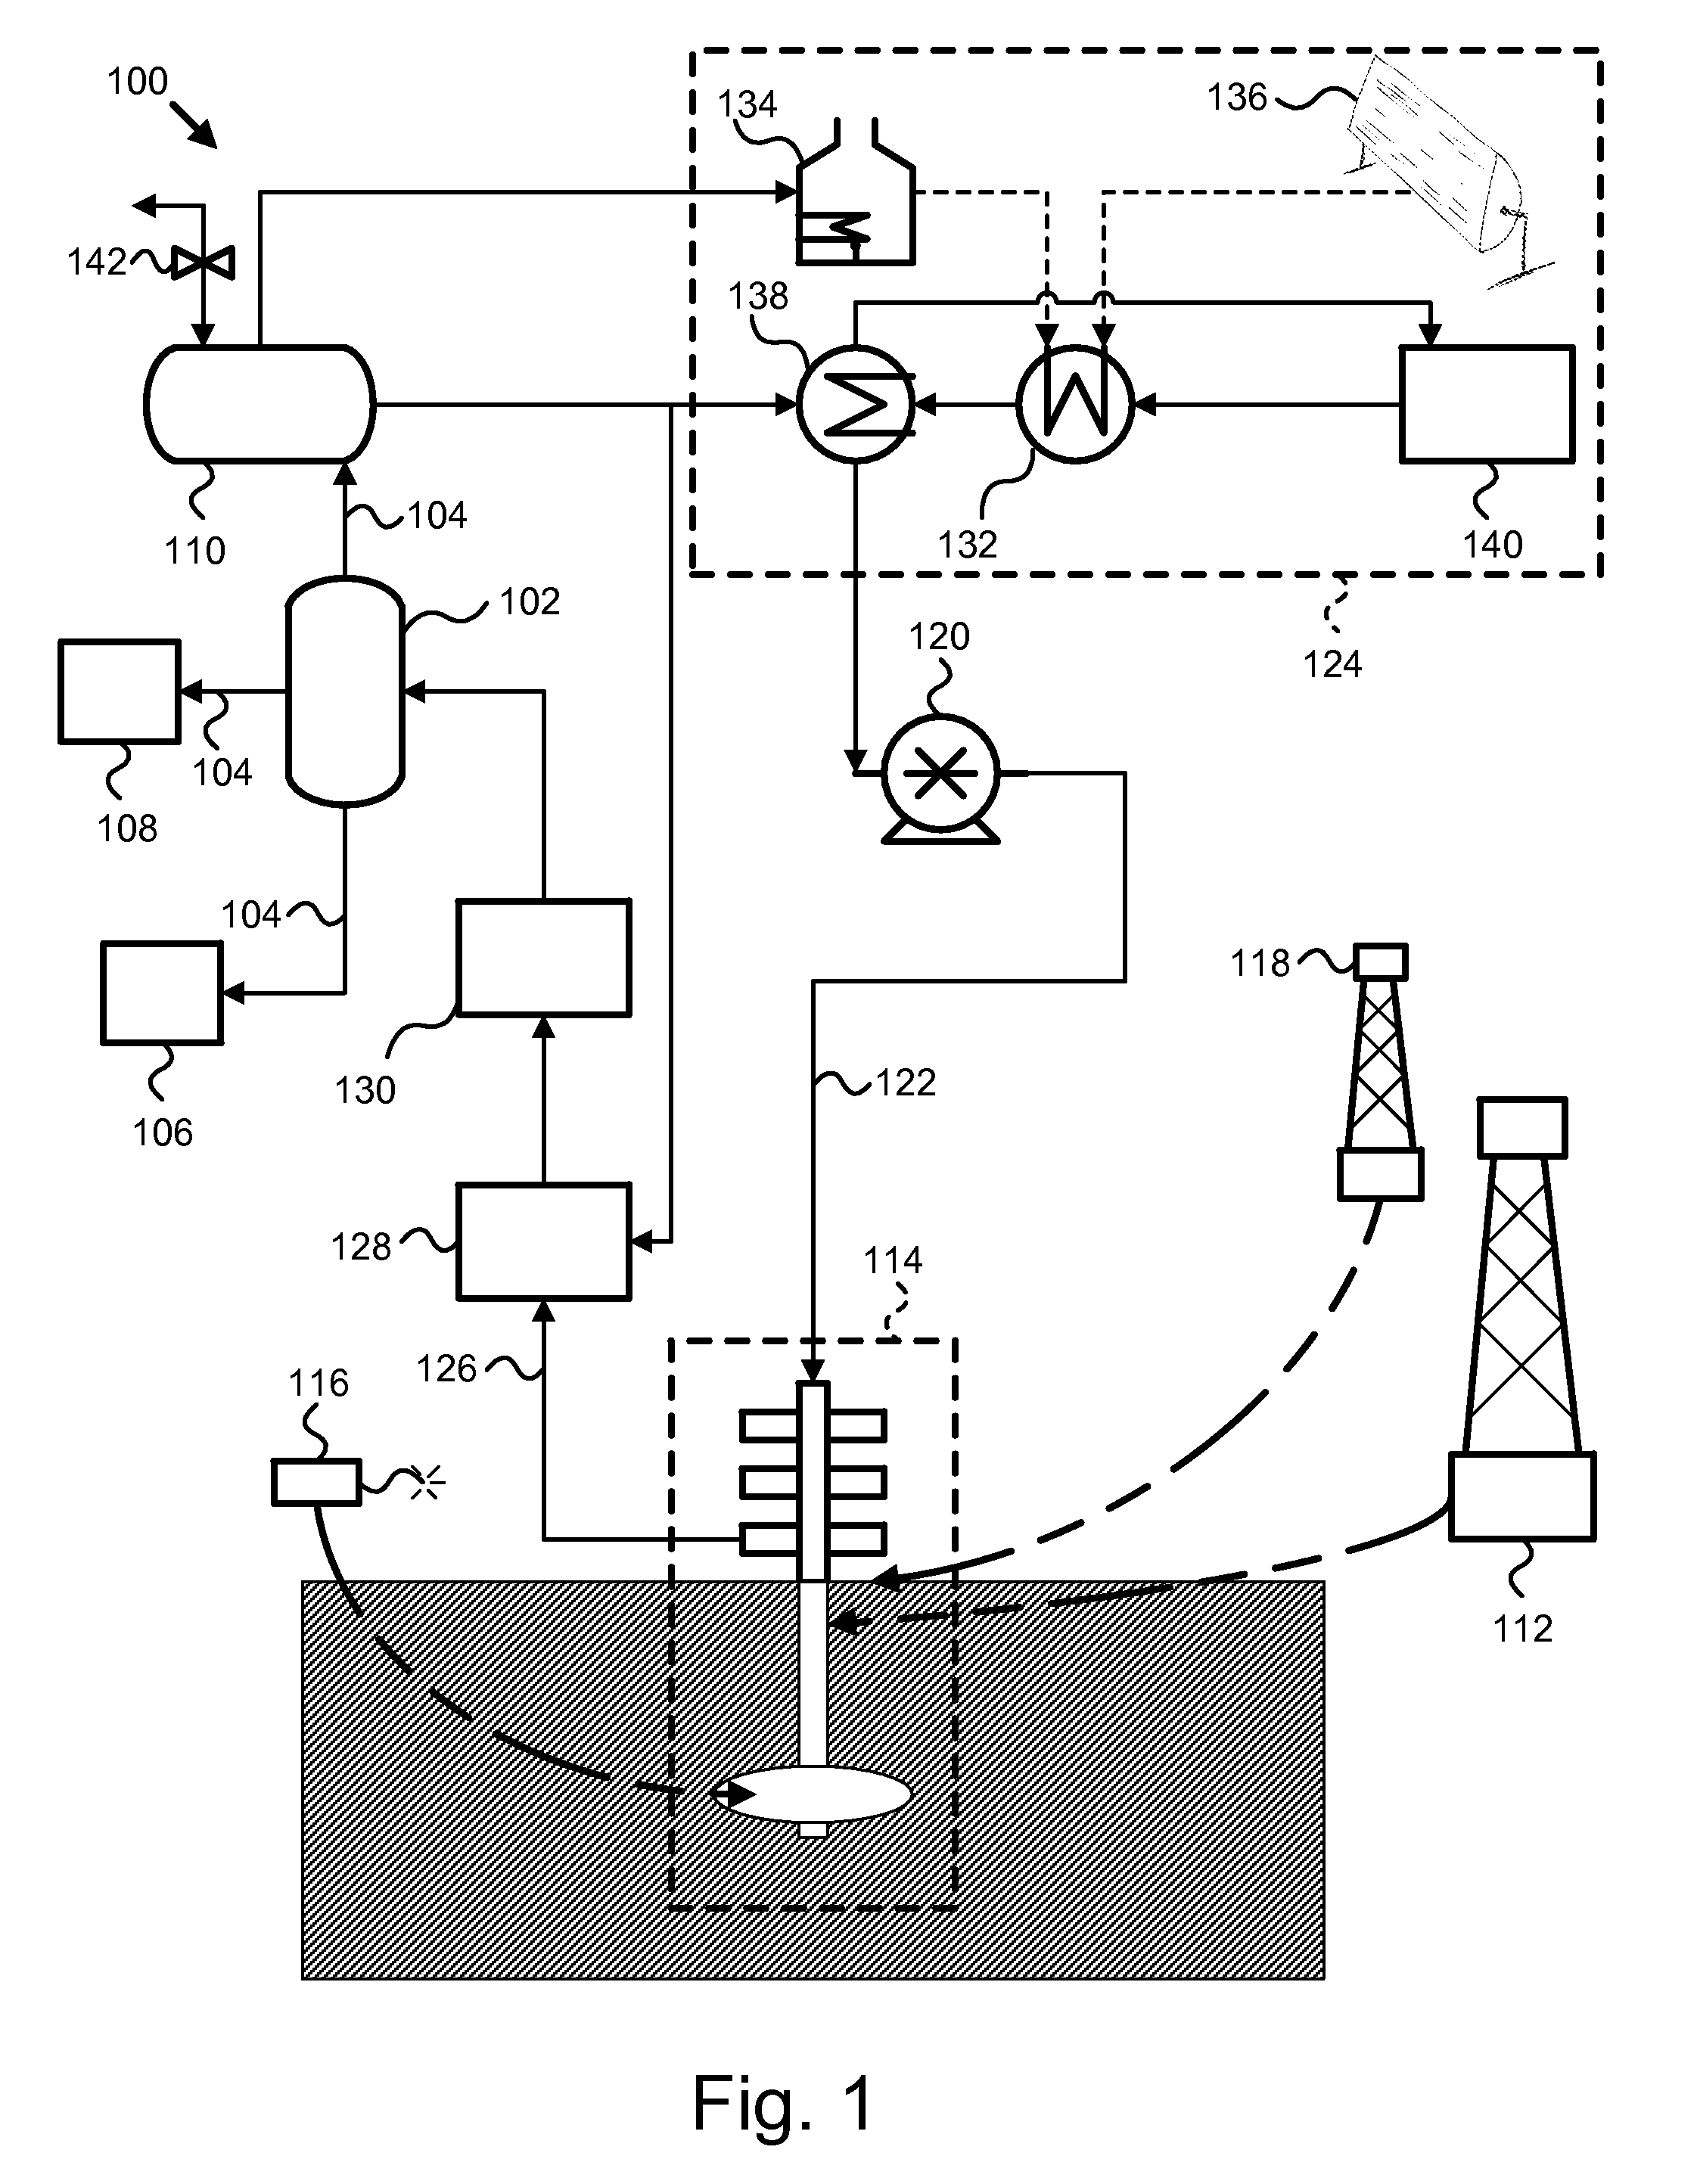 Apparatus, system, and method for in-situ extraction of oil from oil shale